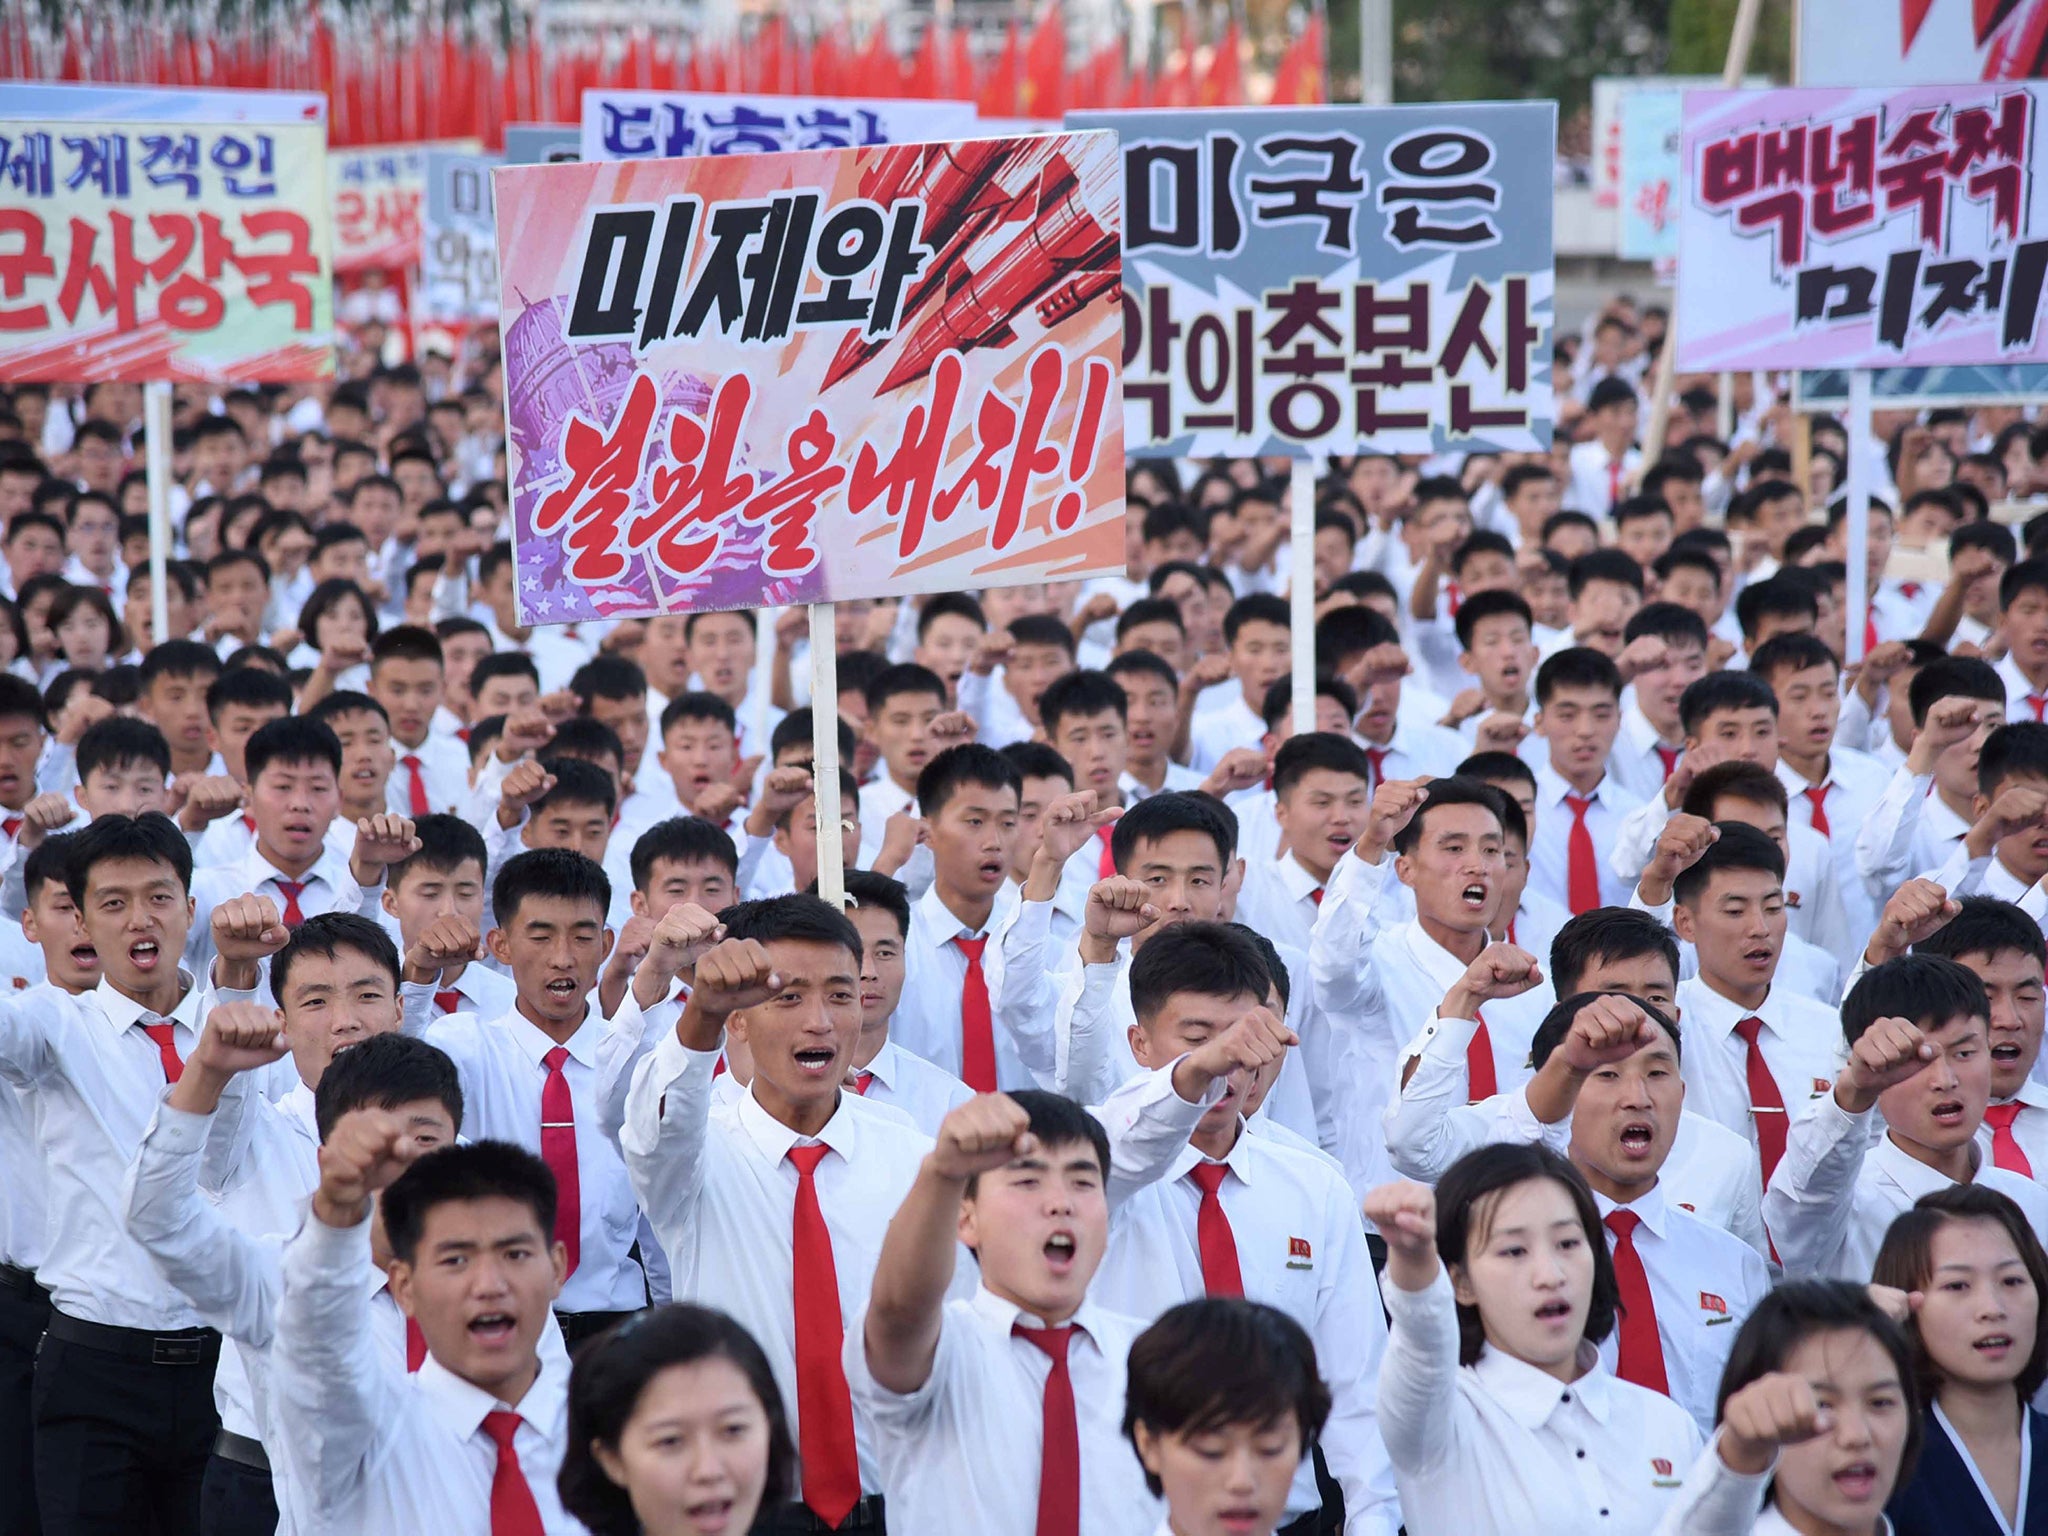 An anti-US rally at Kim Il Sung Square in Pyongyang on September 24. Placards read: 'Be through with the US' and 'The US is evil's headquarters'